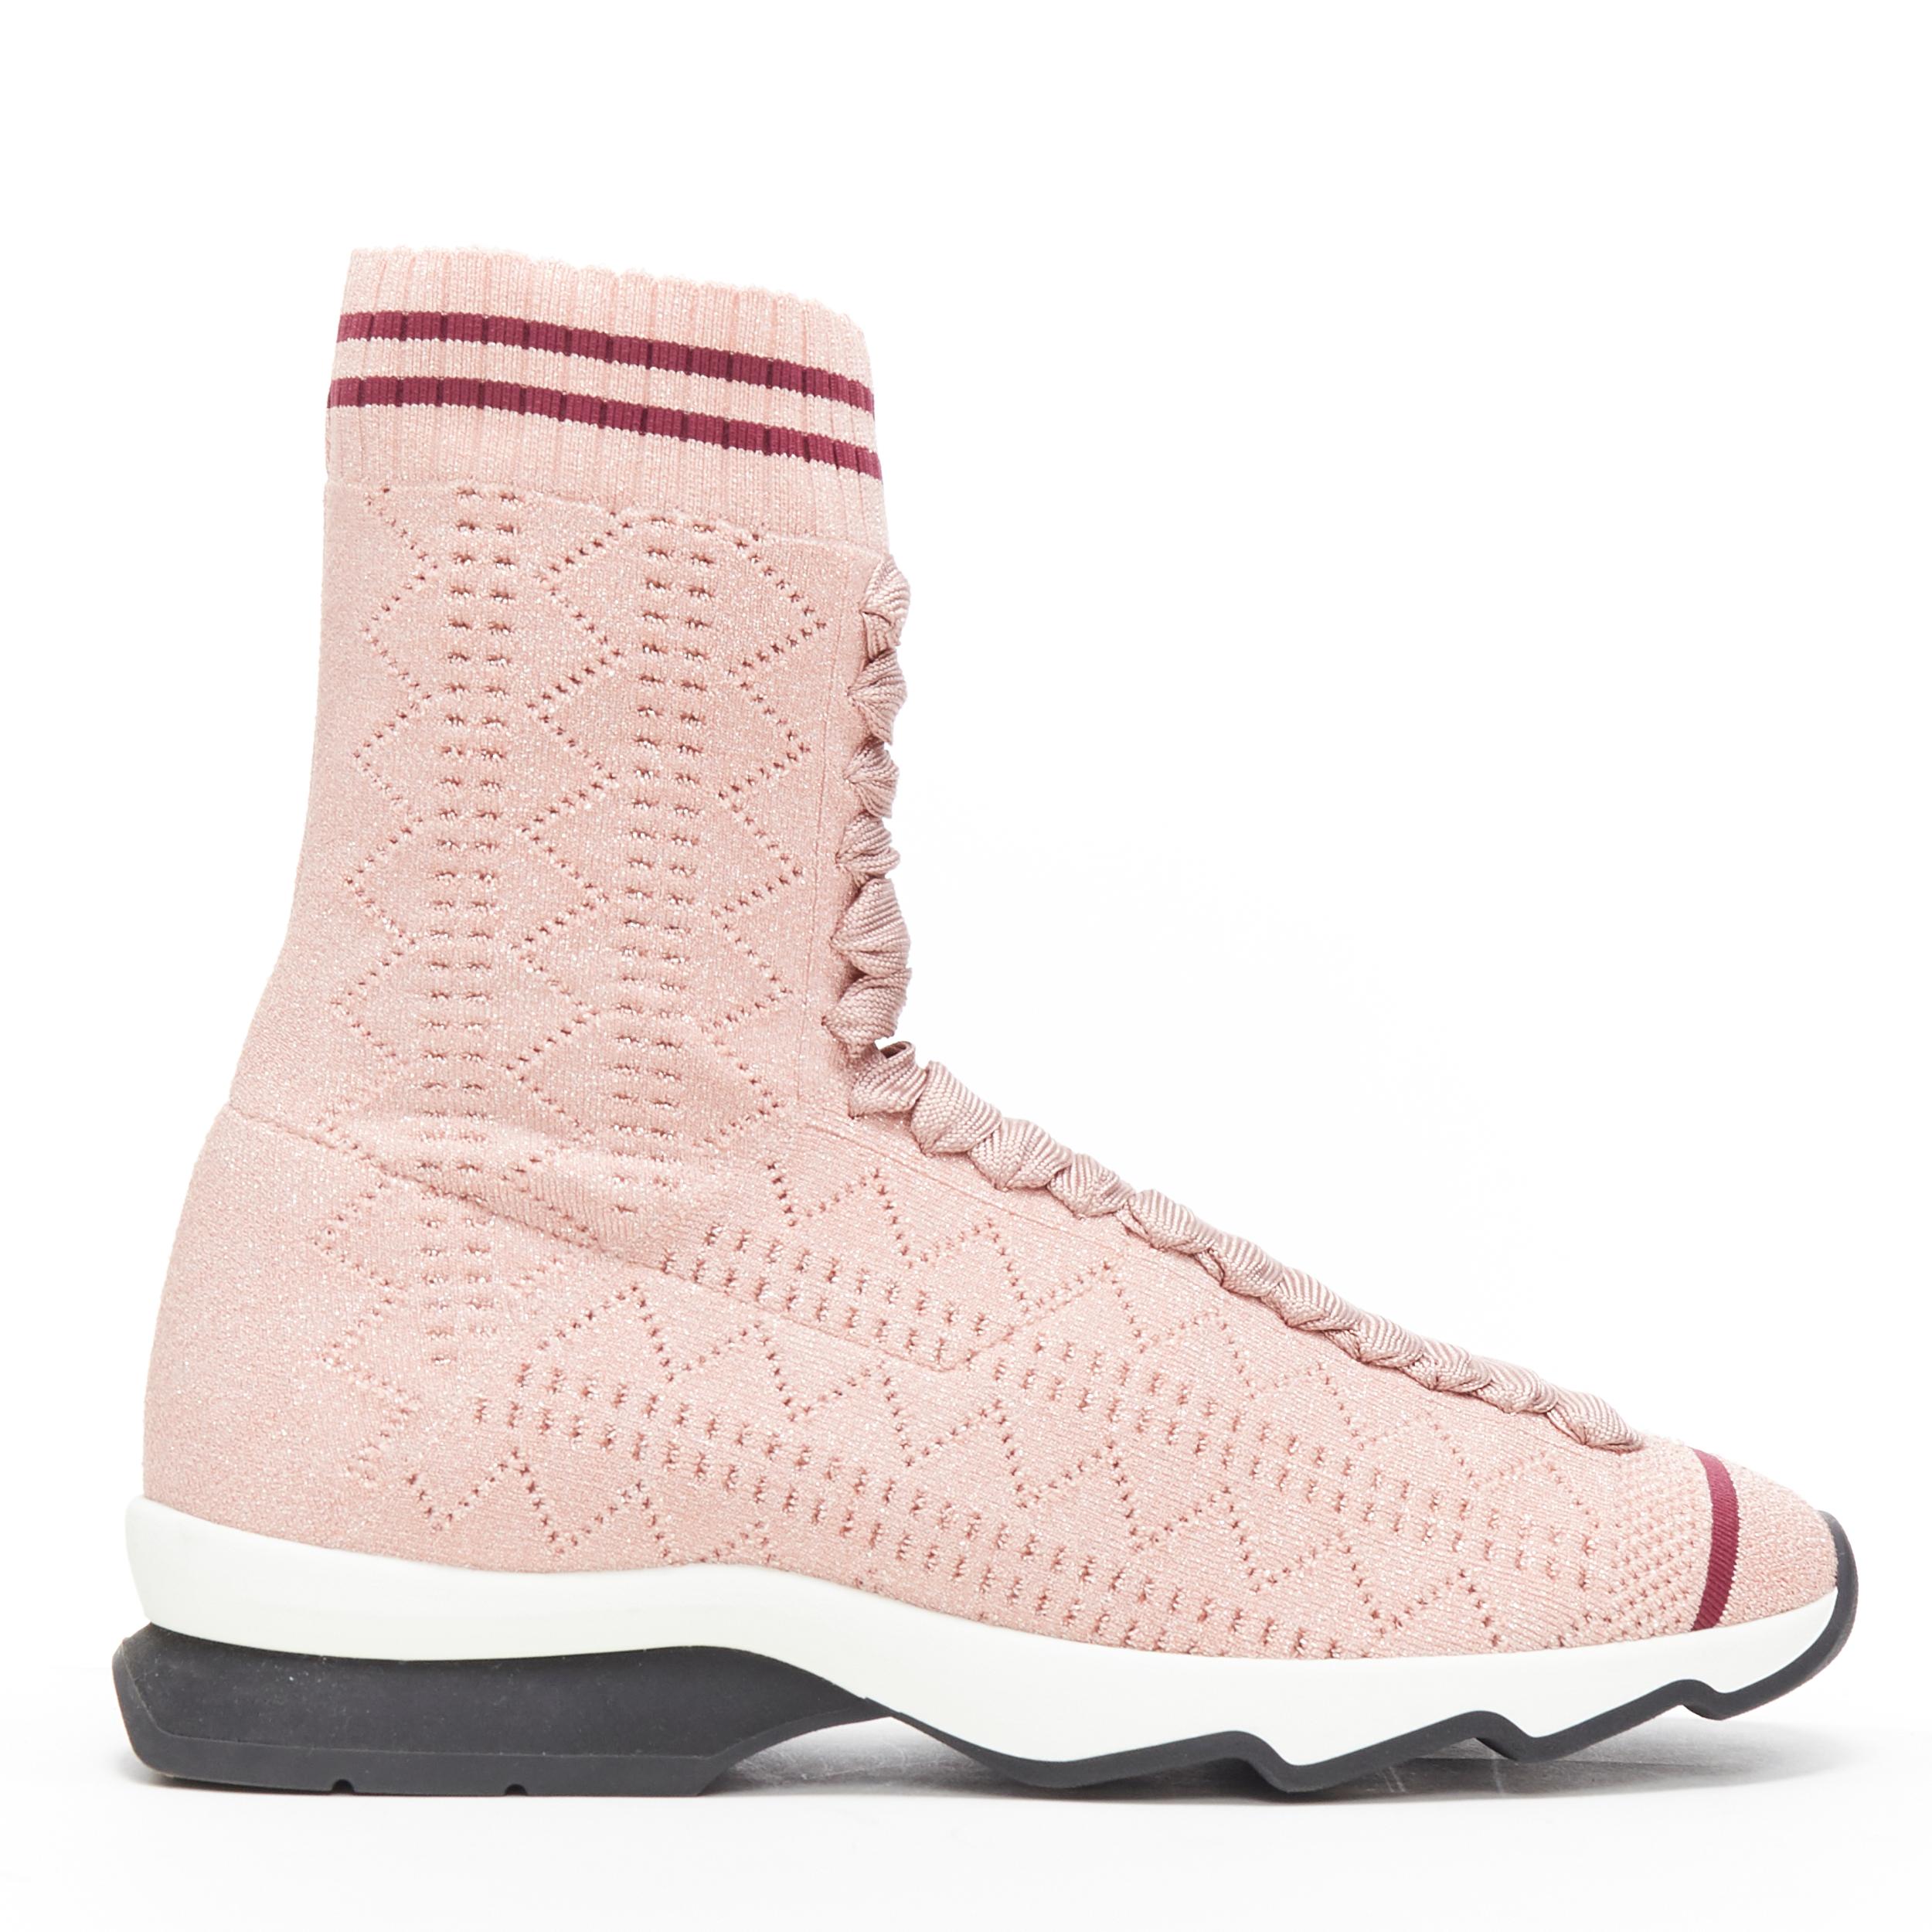 FENDI Sock Sneaker pink silver lurex round toe knitted high top shoes EU36
Brand: Fendi
Model Name / Style: Sock sneakers
Material: Fabric
Color: Pink
Pattern: Solid
Closure: Pull on
Extra Detail: Low (1-1.9 in) heel height. Round toe.
Made in: